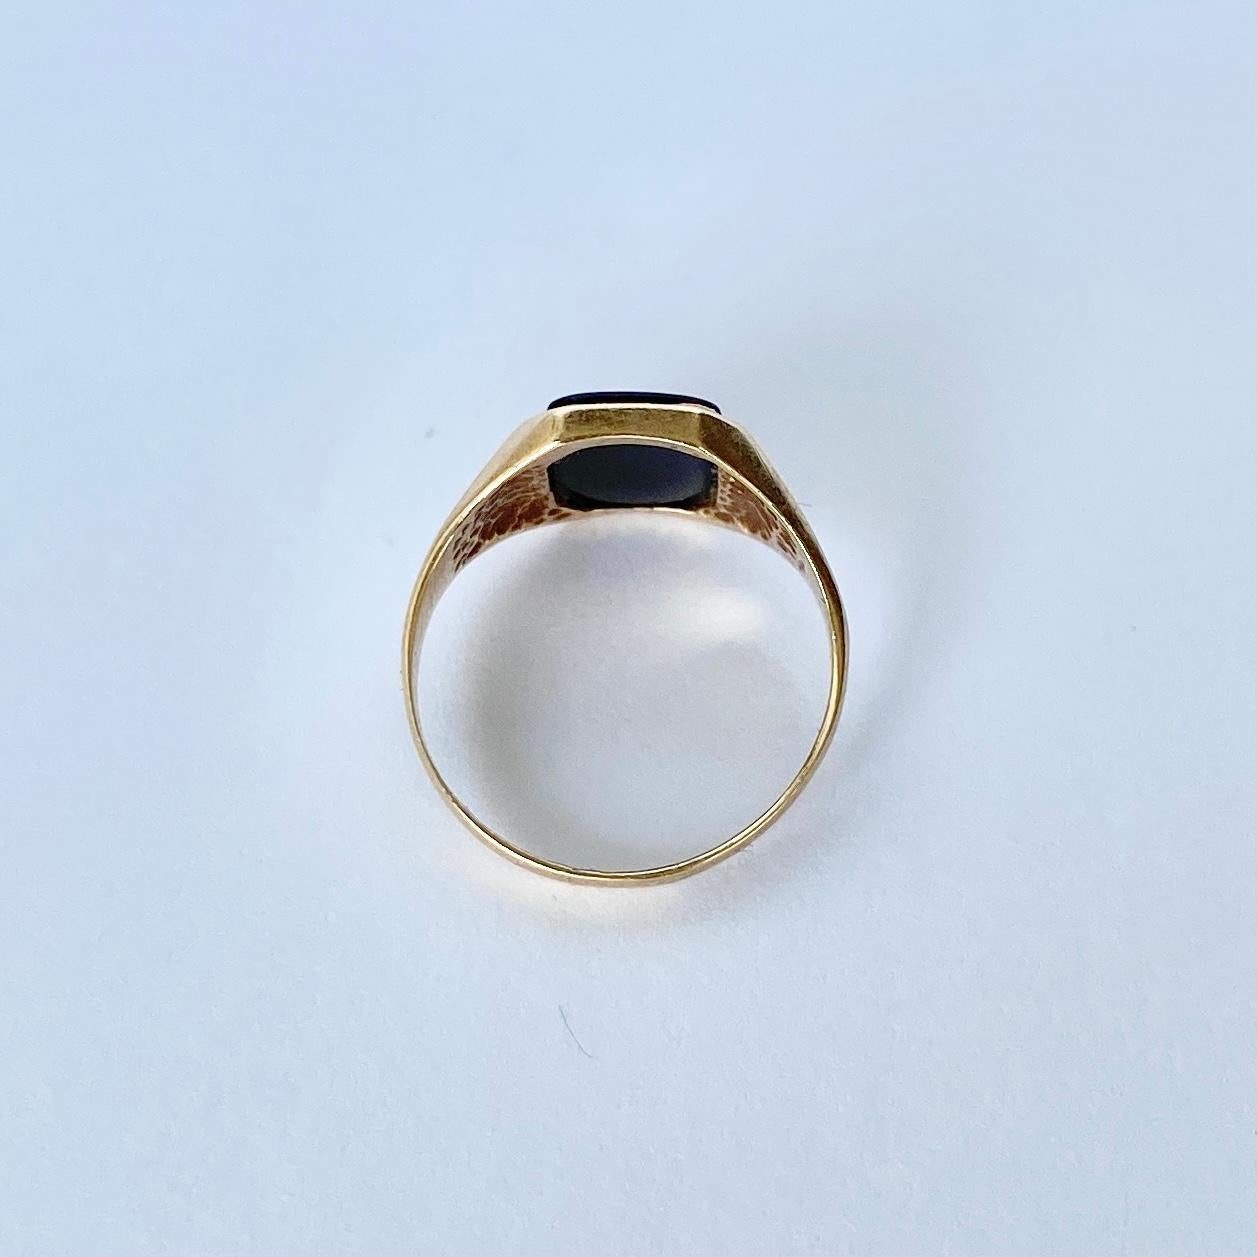 The onyx in this signet ring is in lovely condition and it so glossy! The stone is set within the 9ct gold chunky band. Hallmarked London. 

Ring Size: I 1/2 or 4 1/2 
Stone Dimensions: 9x7mm 

Weight: 1.6g